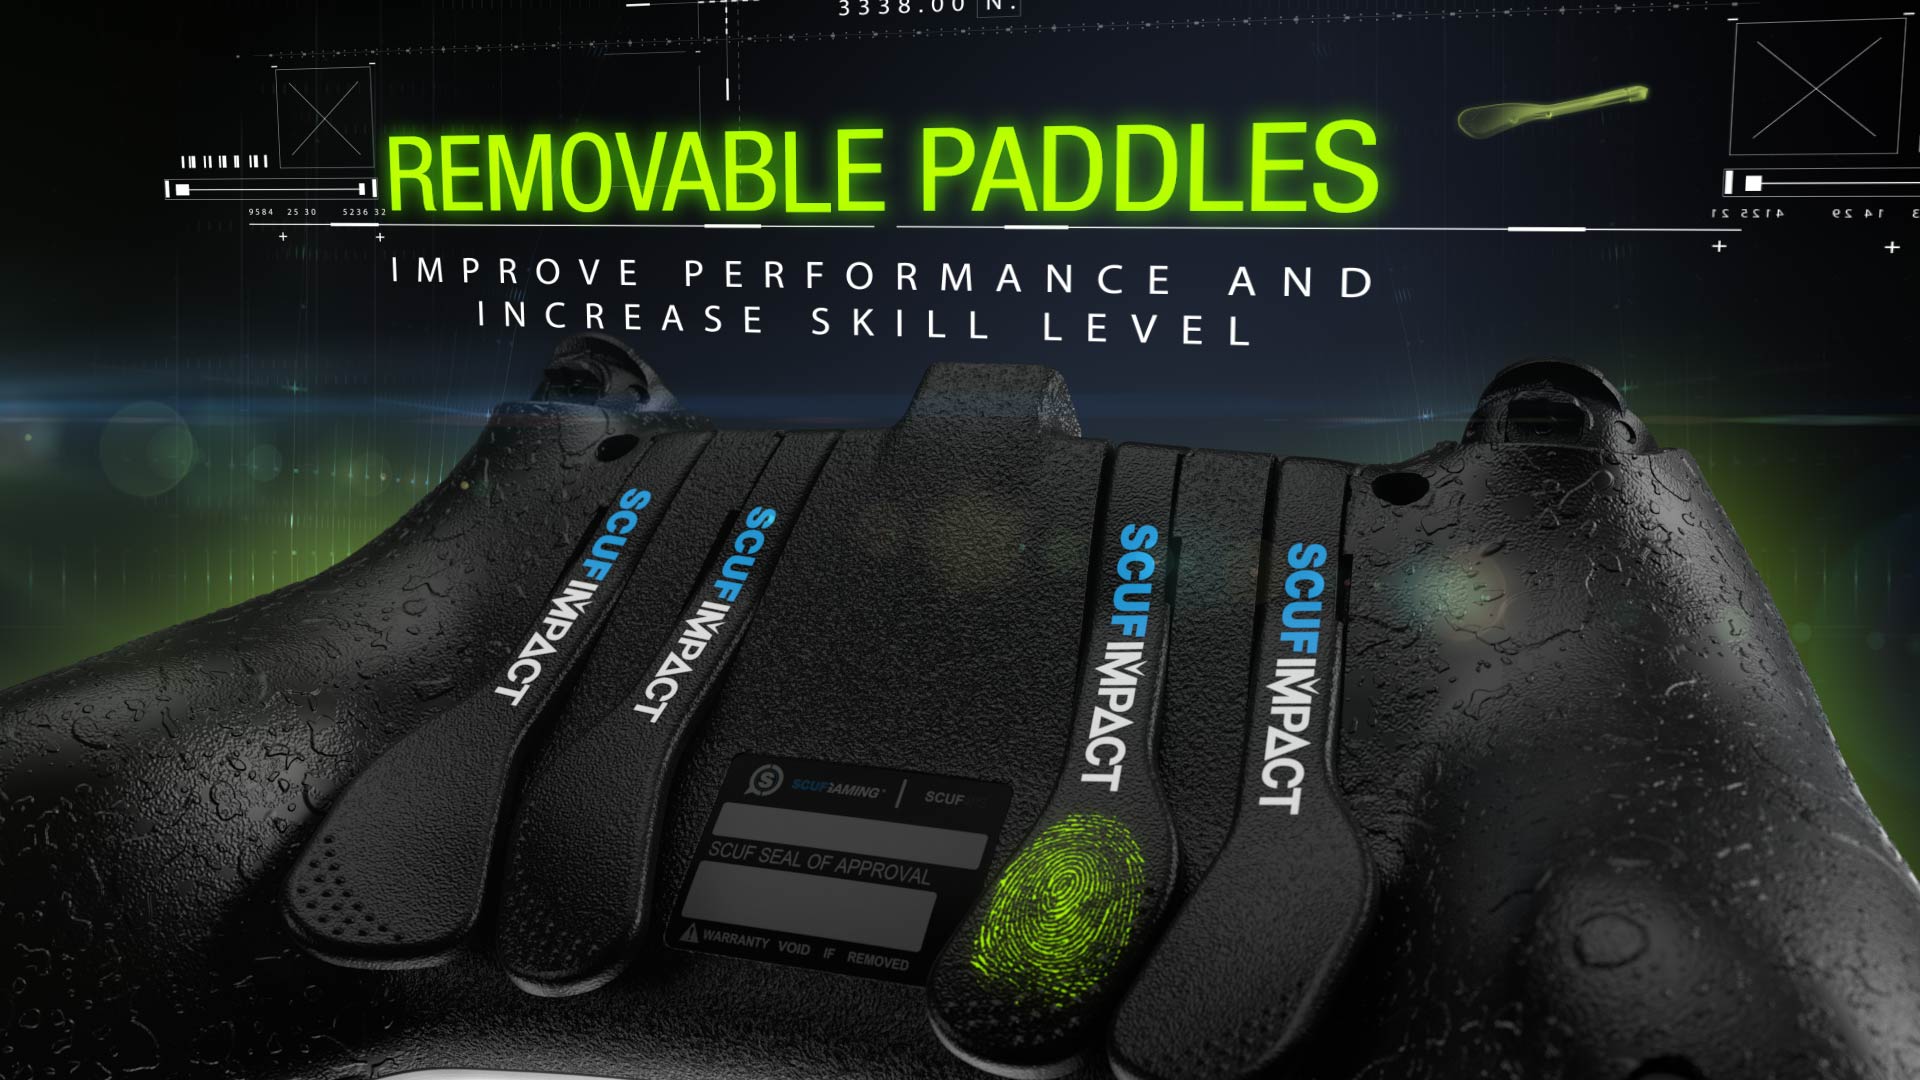 SCUF IMPACT Paddle Control System